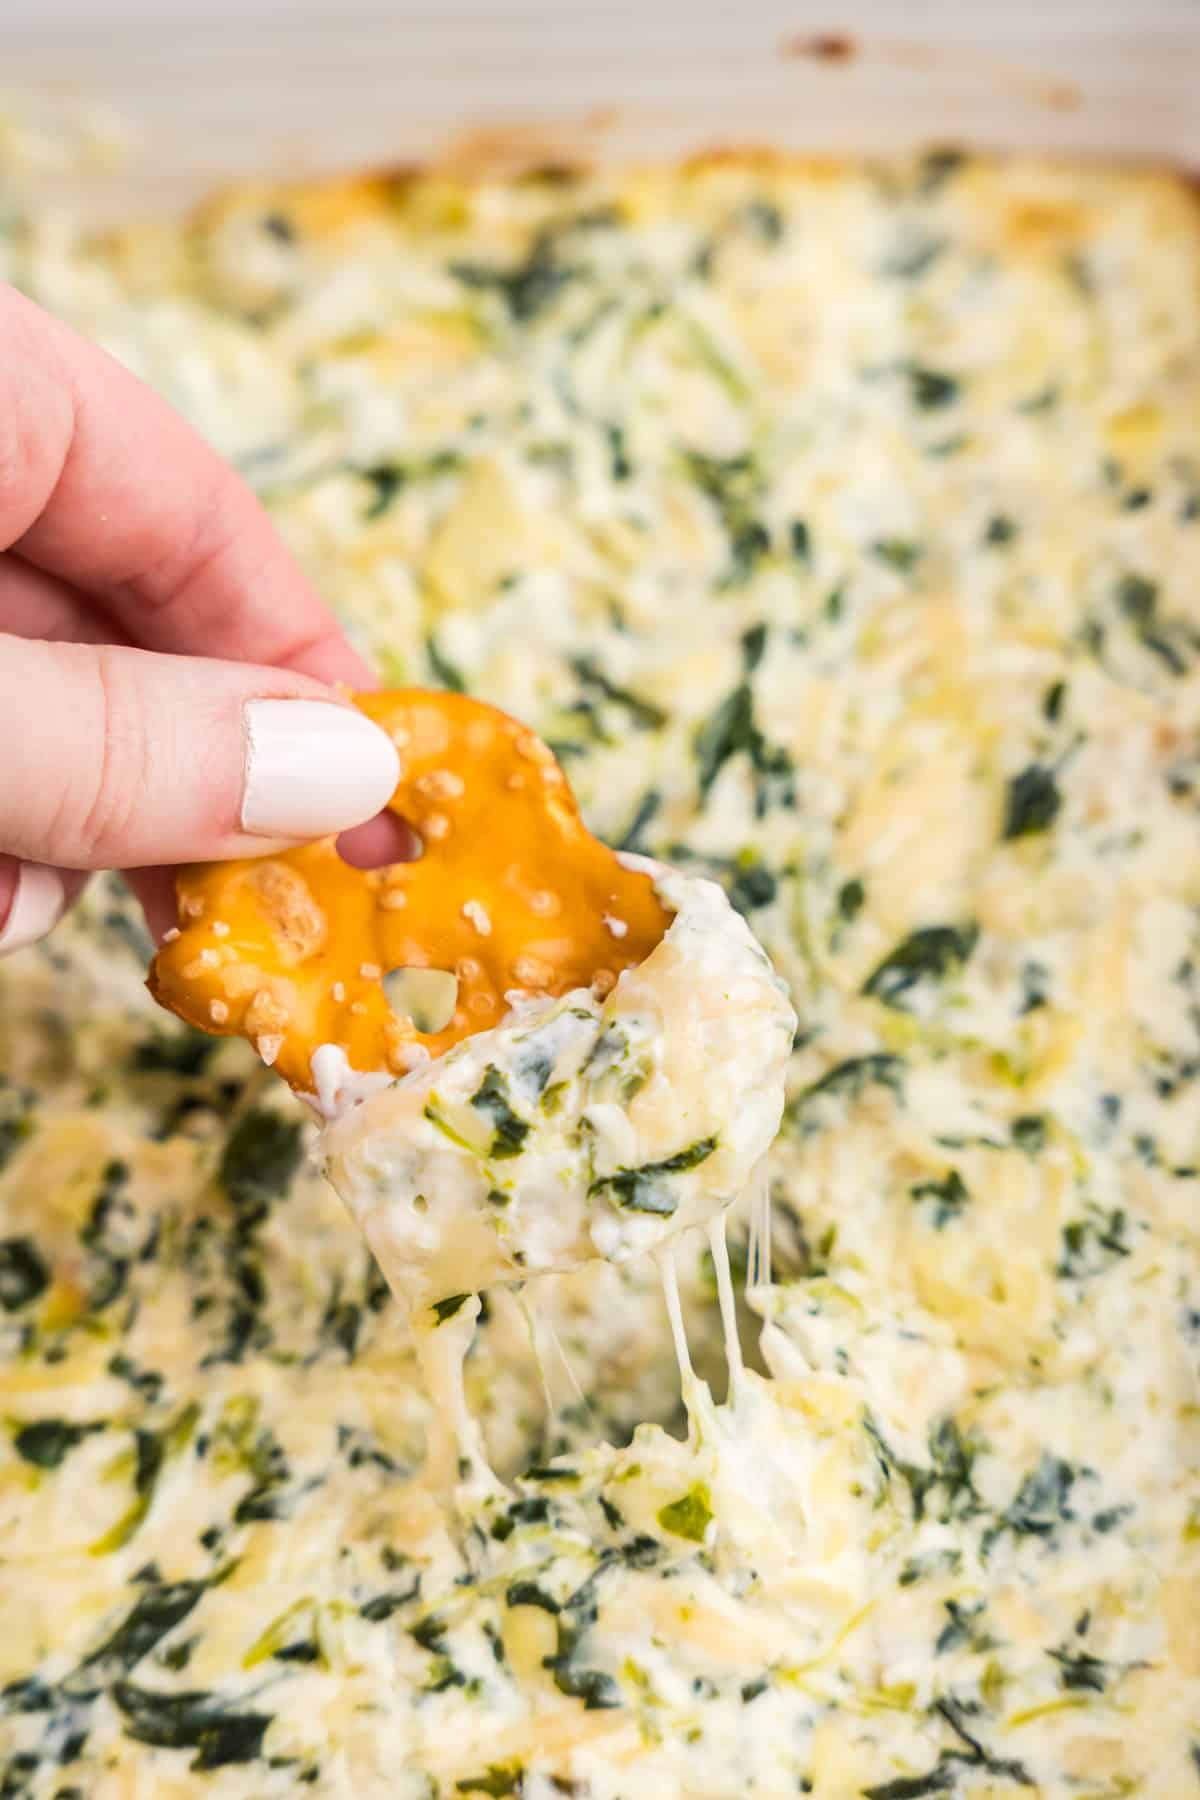 Using a pretzel to dip Spinach Artichoke Dip from baking dish